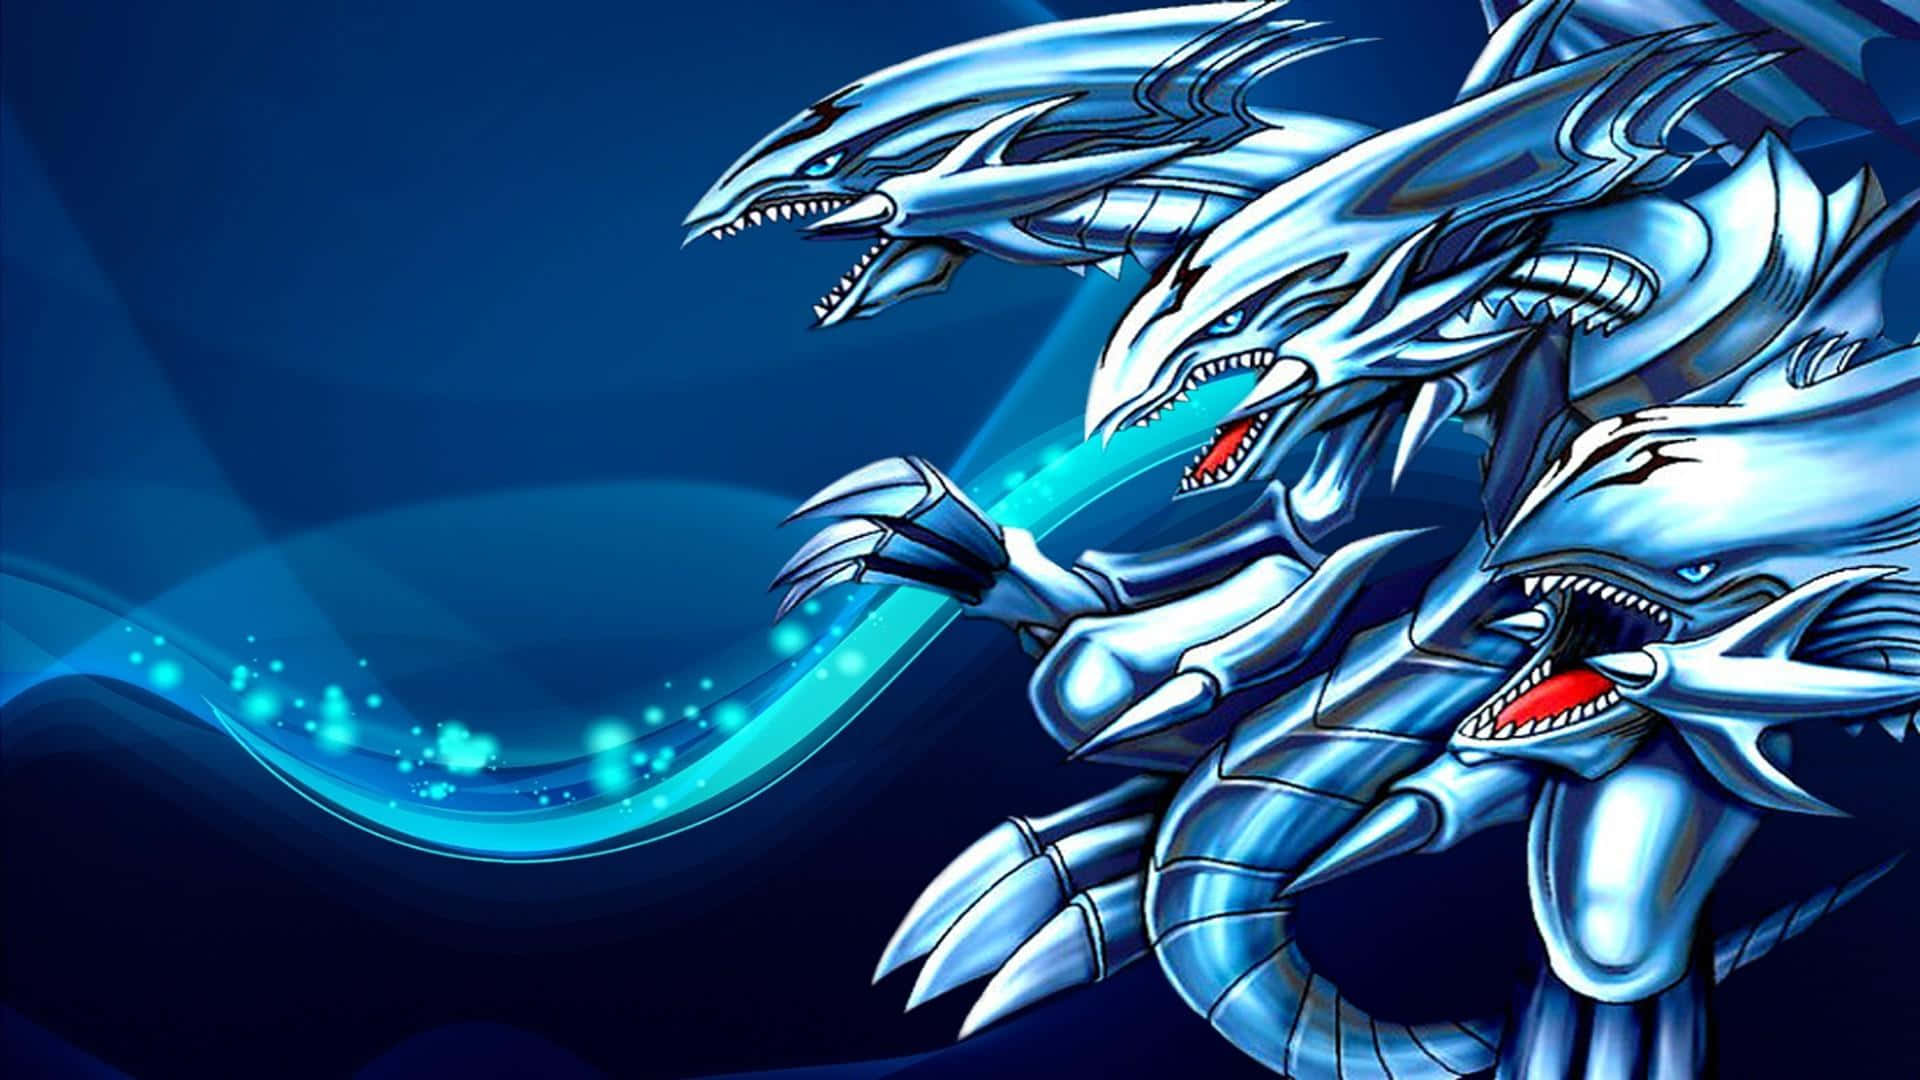 A Blue And Silver Dragon With A Blue Background Wallpaper